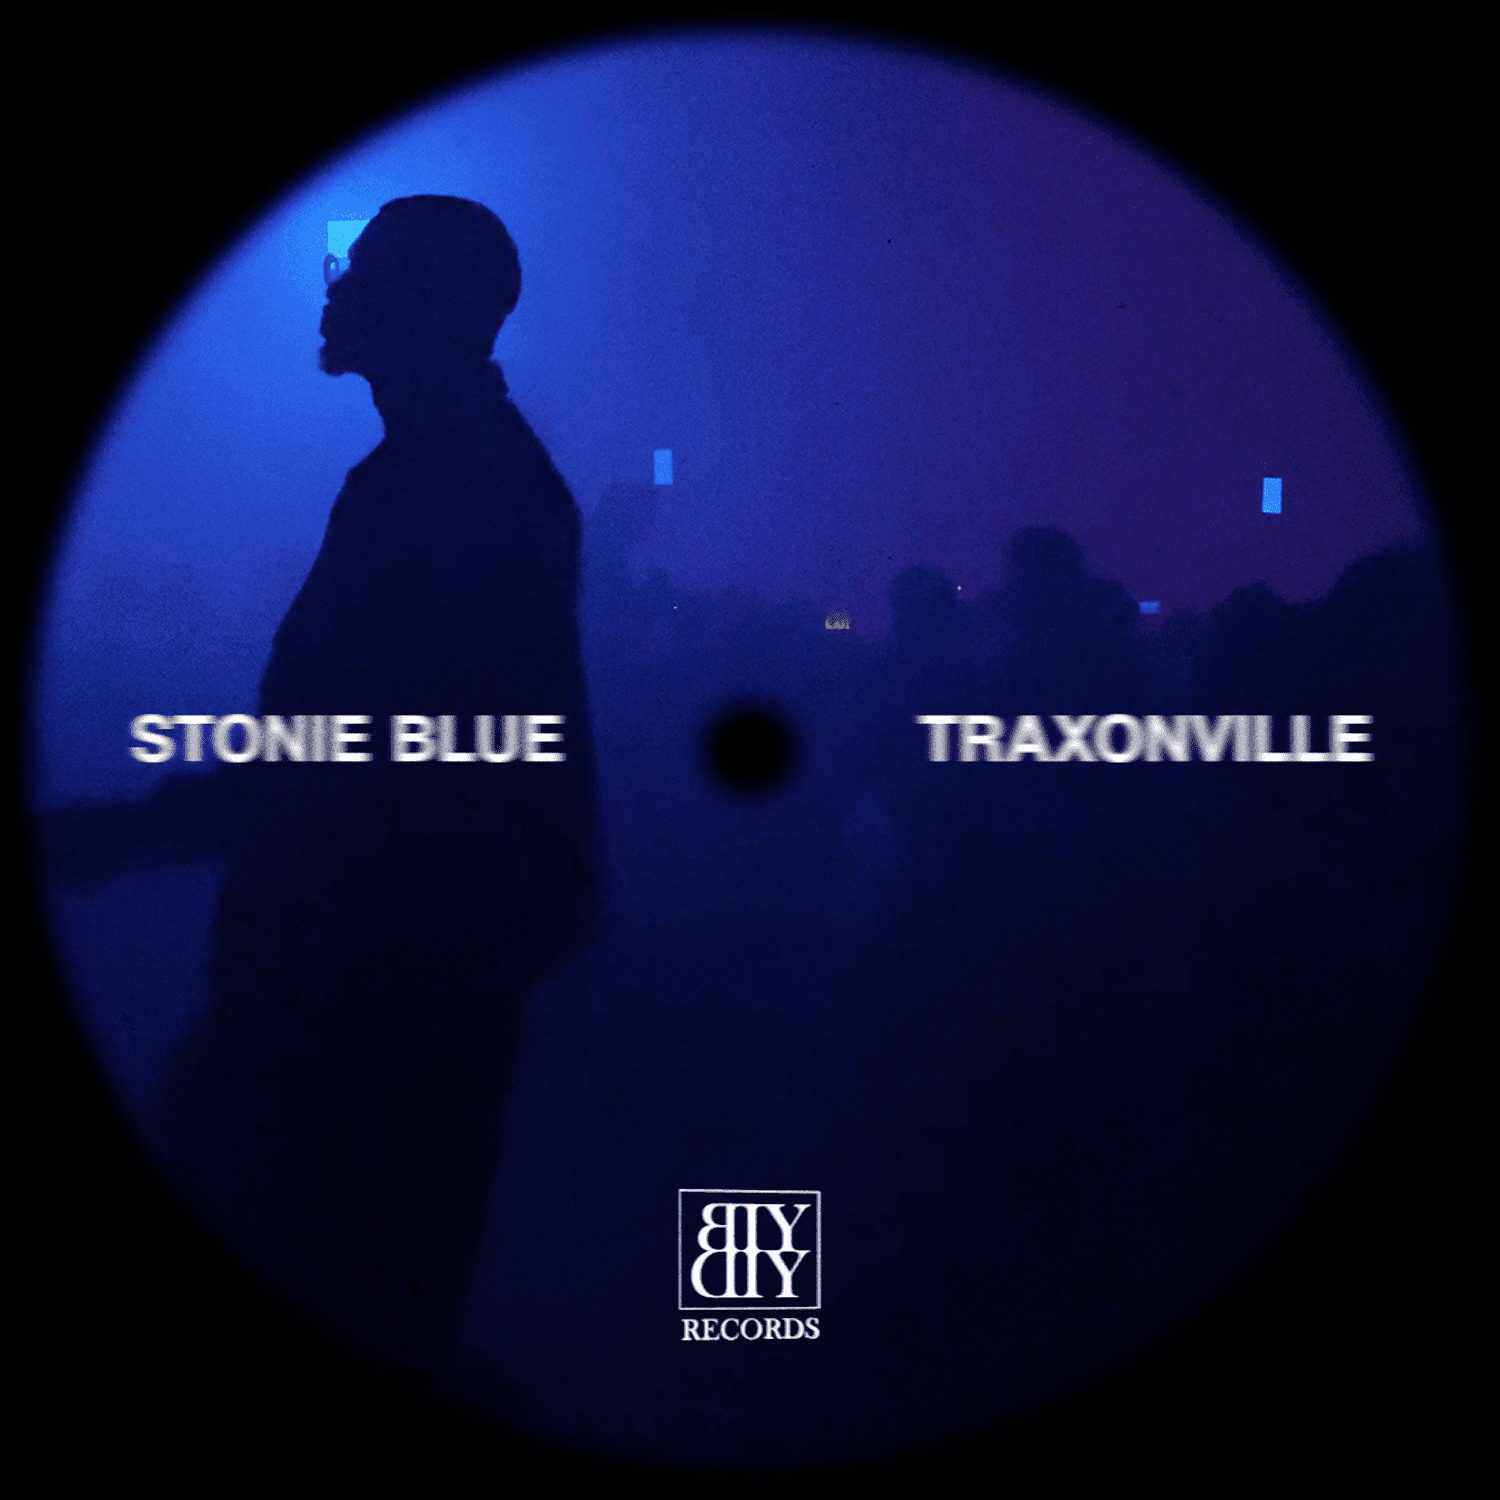 Cover art for TRAXONVILLE by Stonie Blue